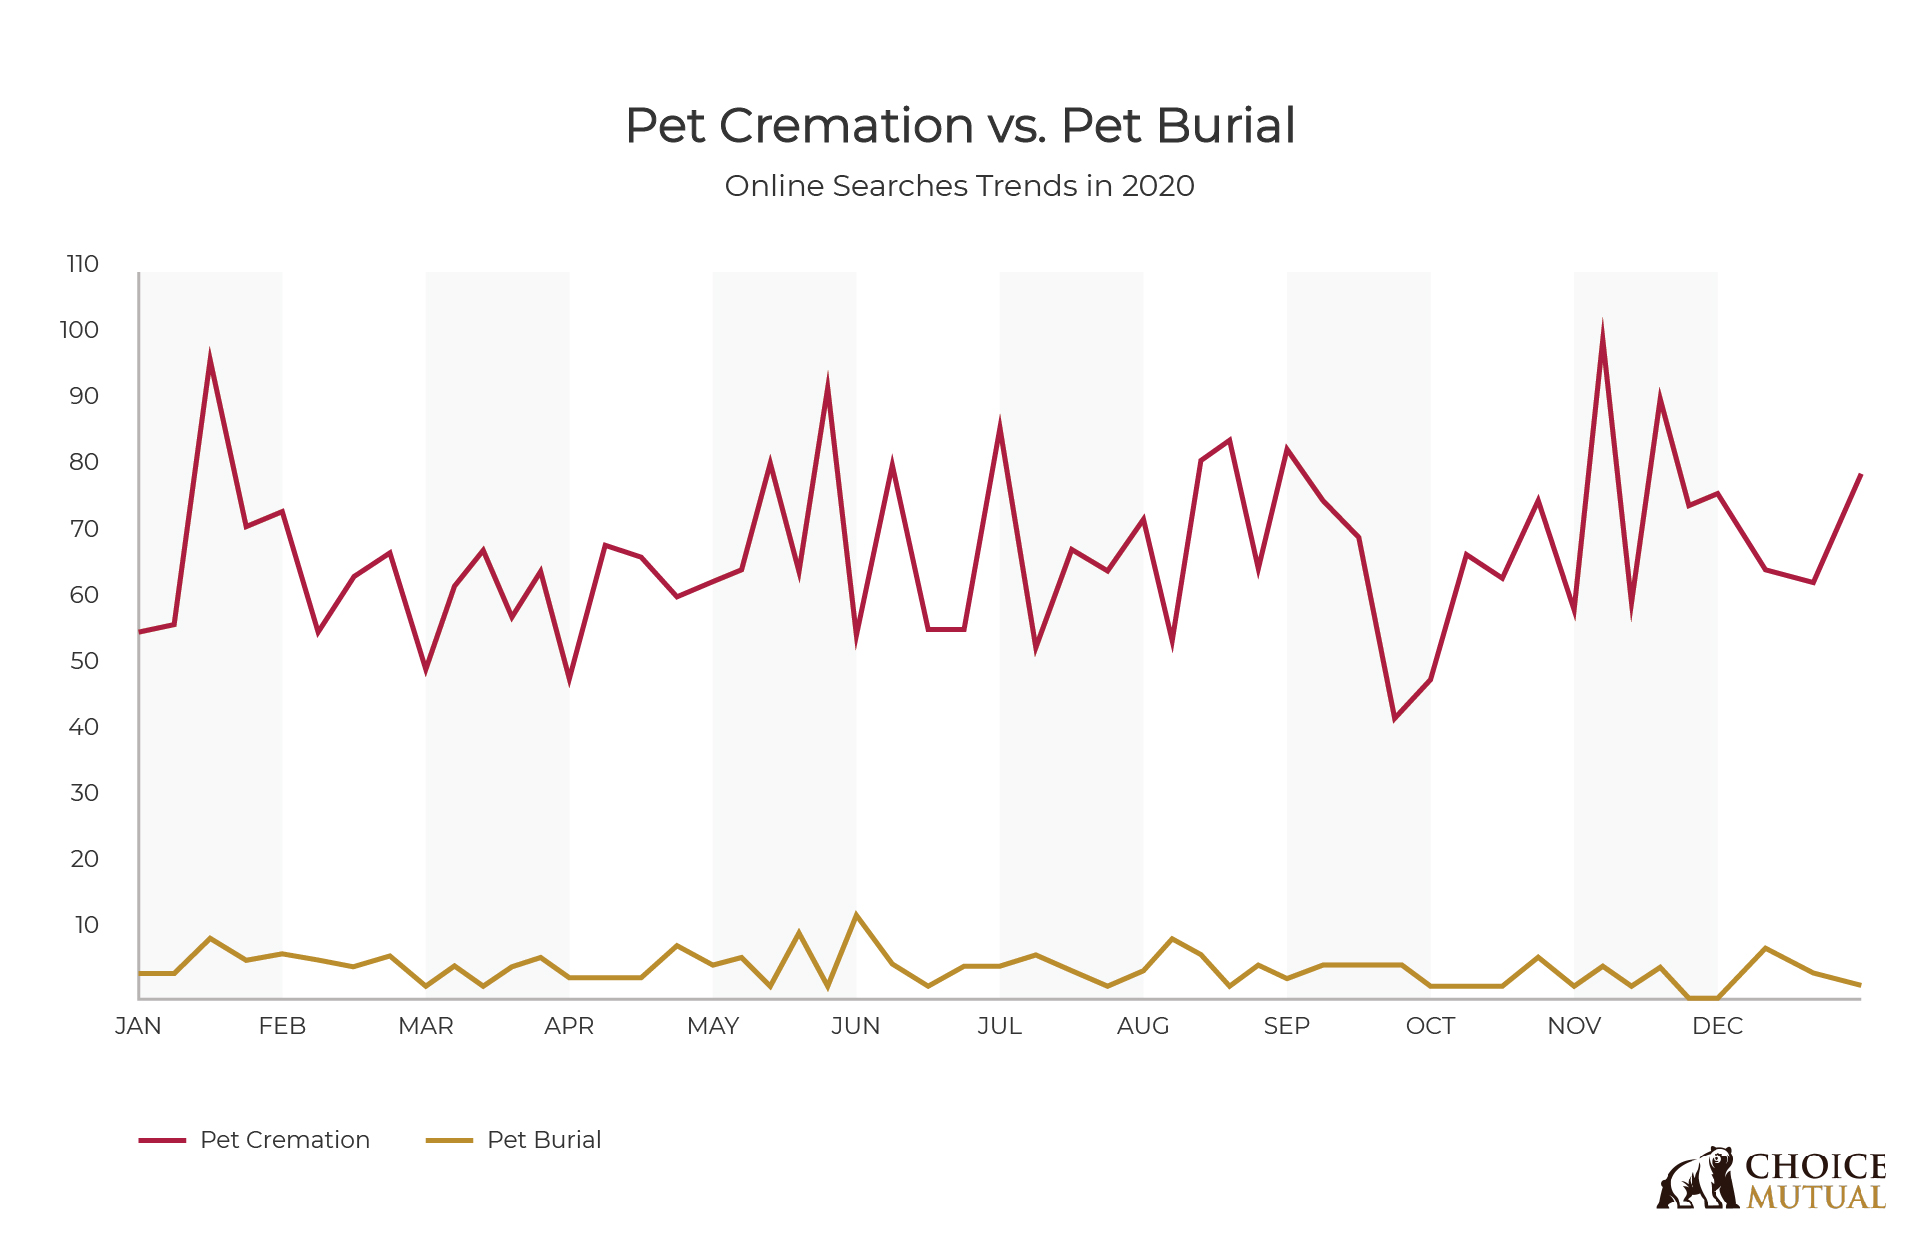 A chart showing online searches for pet cremation and burial over time